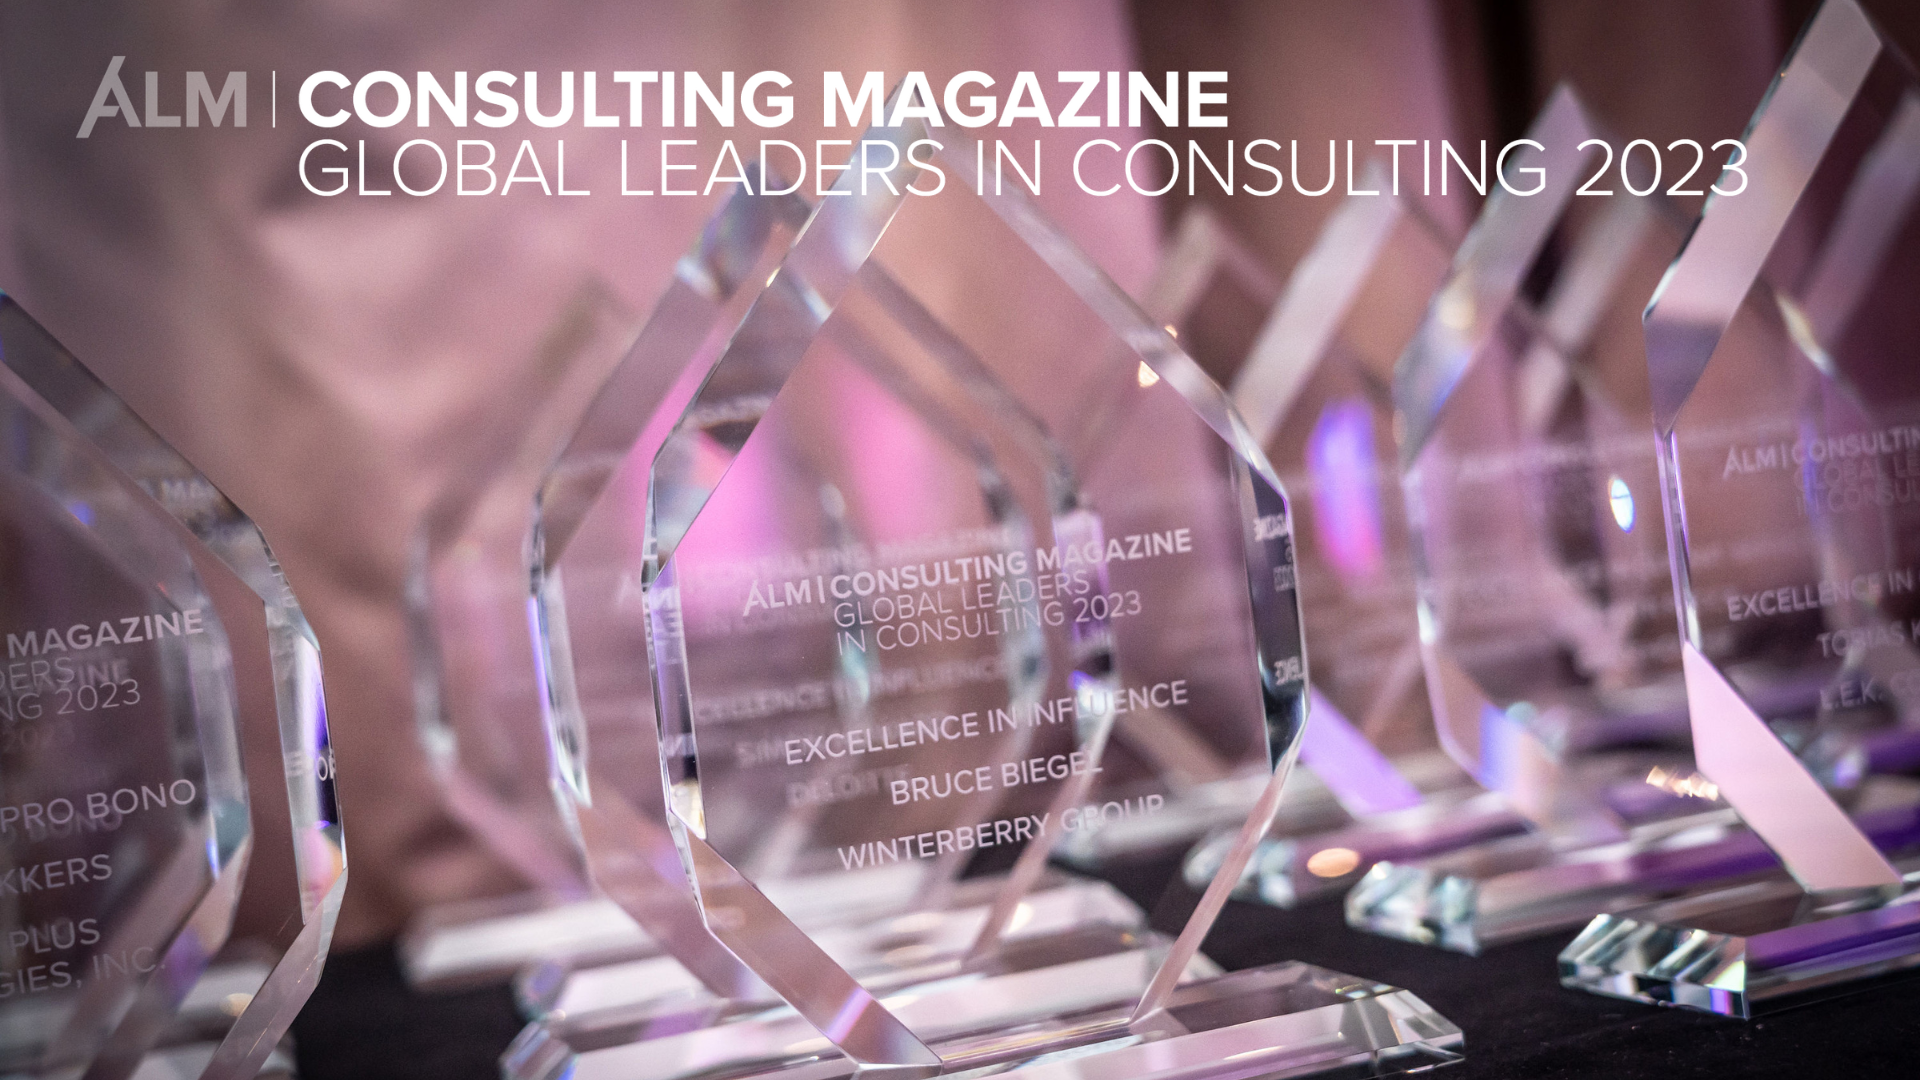 Awards Event and Photos: The 2023 Global Leaders in Consulting